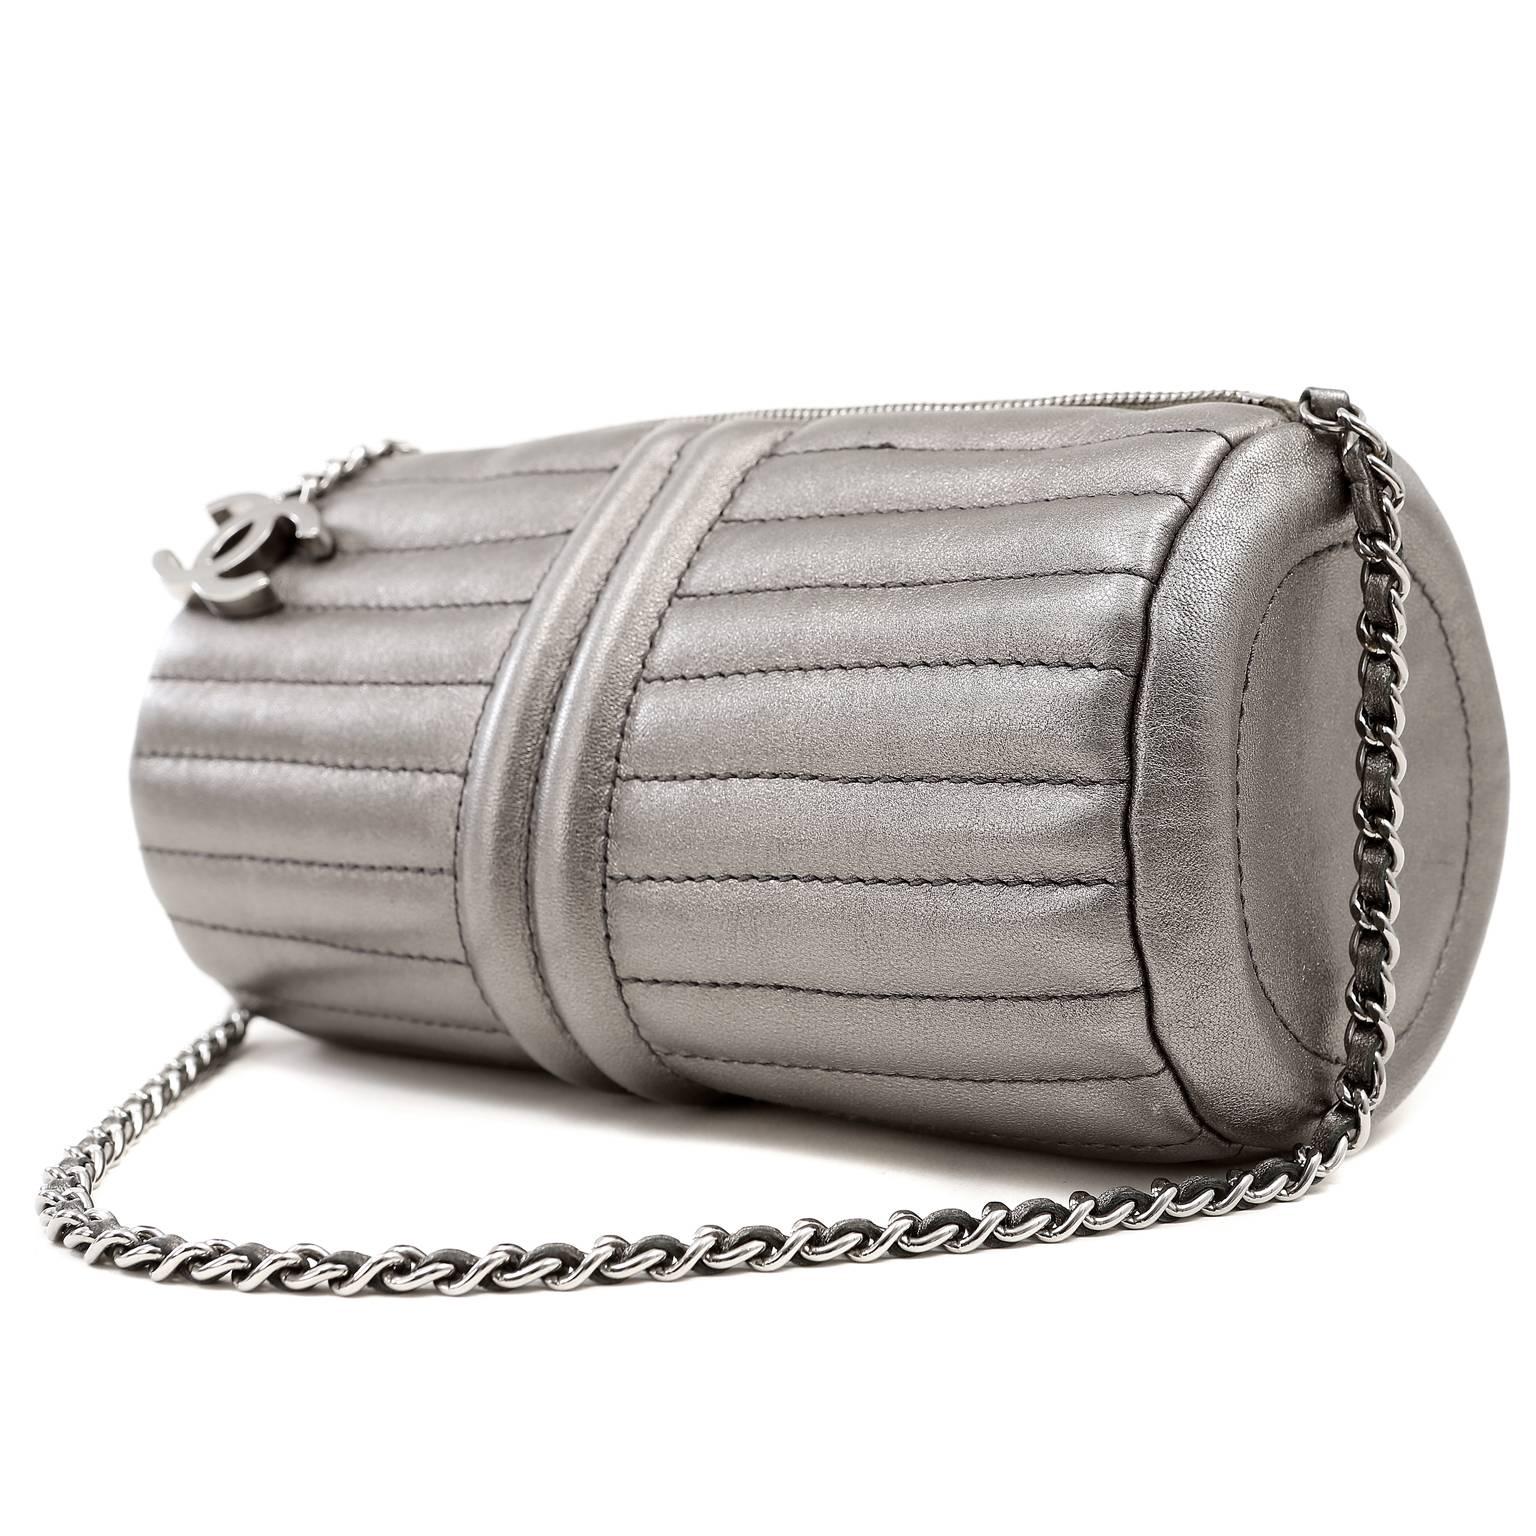 Gray Chanel Vintage Pewter Leather Duffle Style Bag